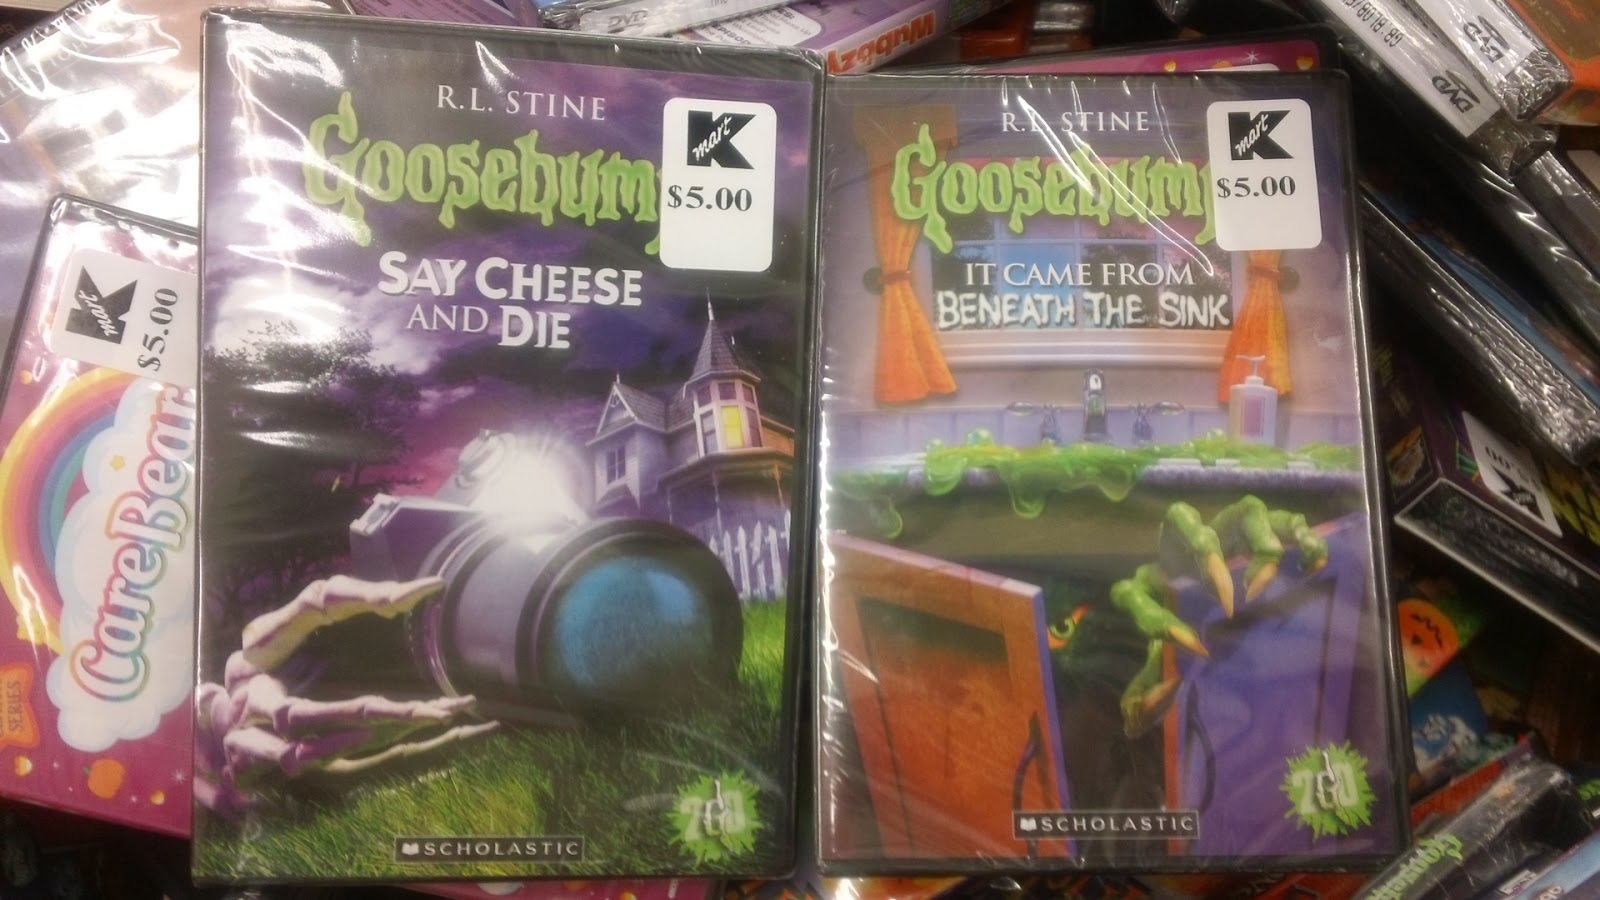 Extreme Couponing Mommy: $3.00 Goosebumps DVDs at KMart1600 x 900